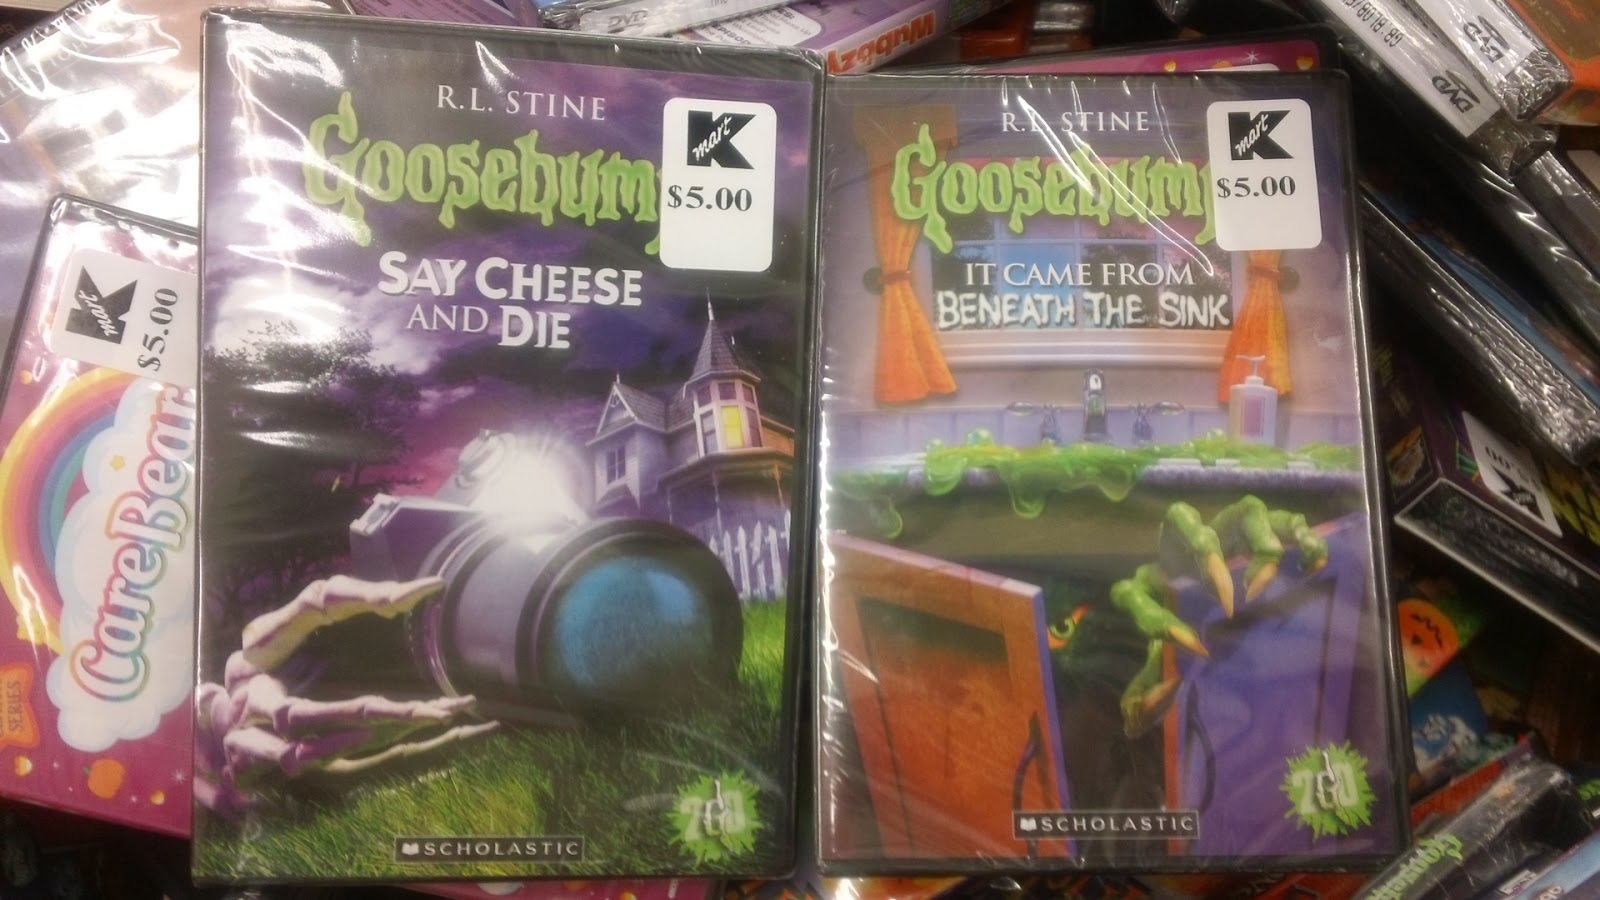 Extreme Couponing Mommy: $3.00 Goosebumps DVDs at KMart1600 x 900